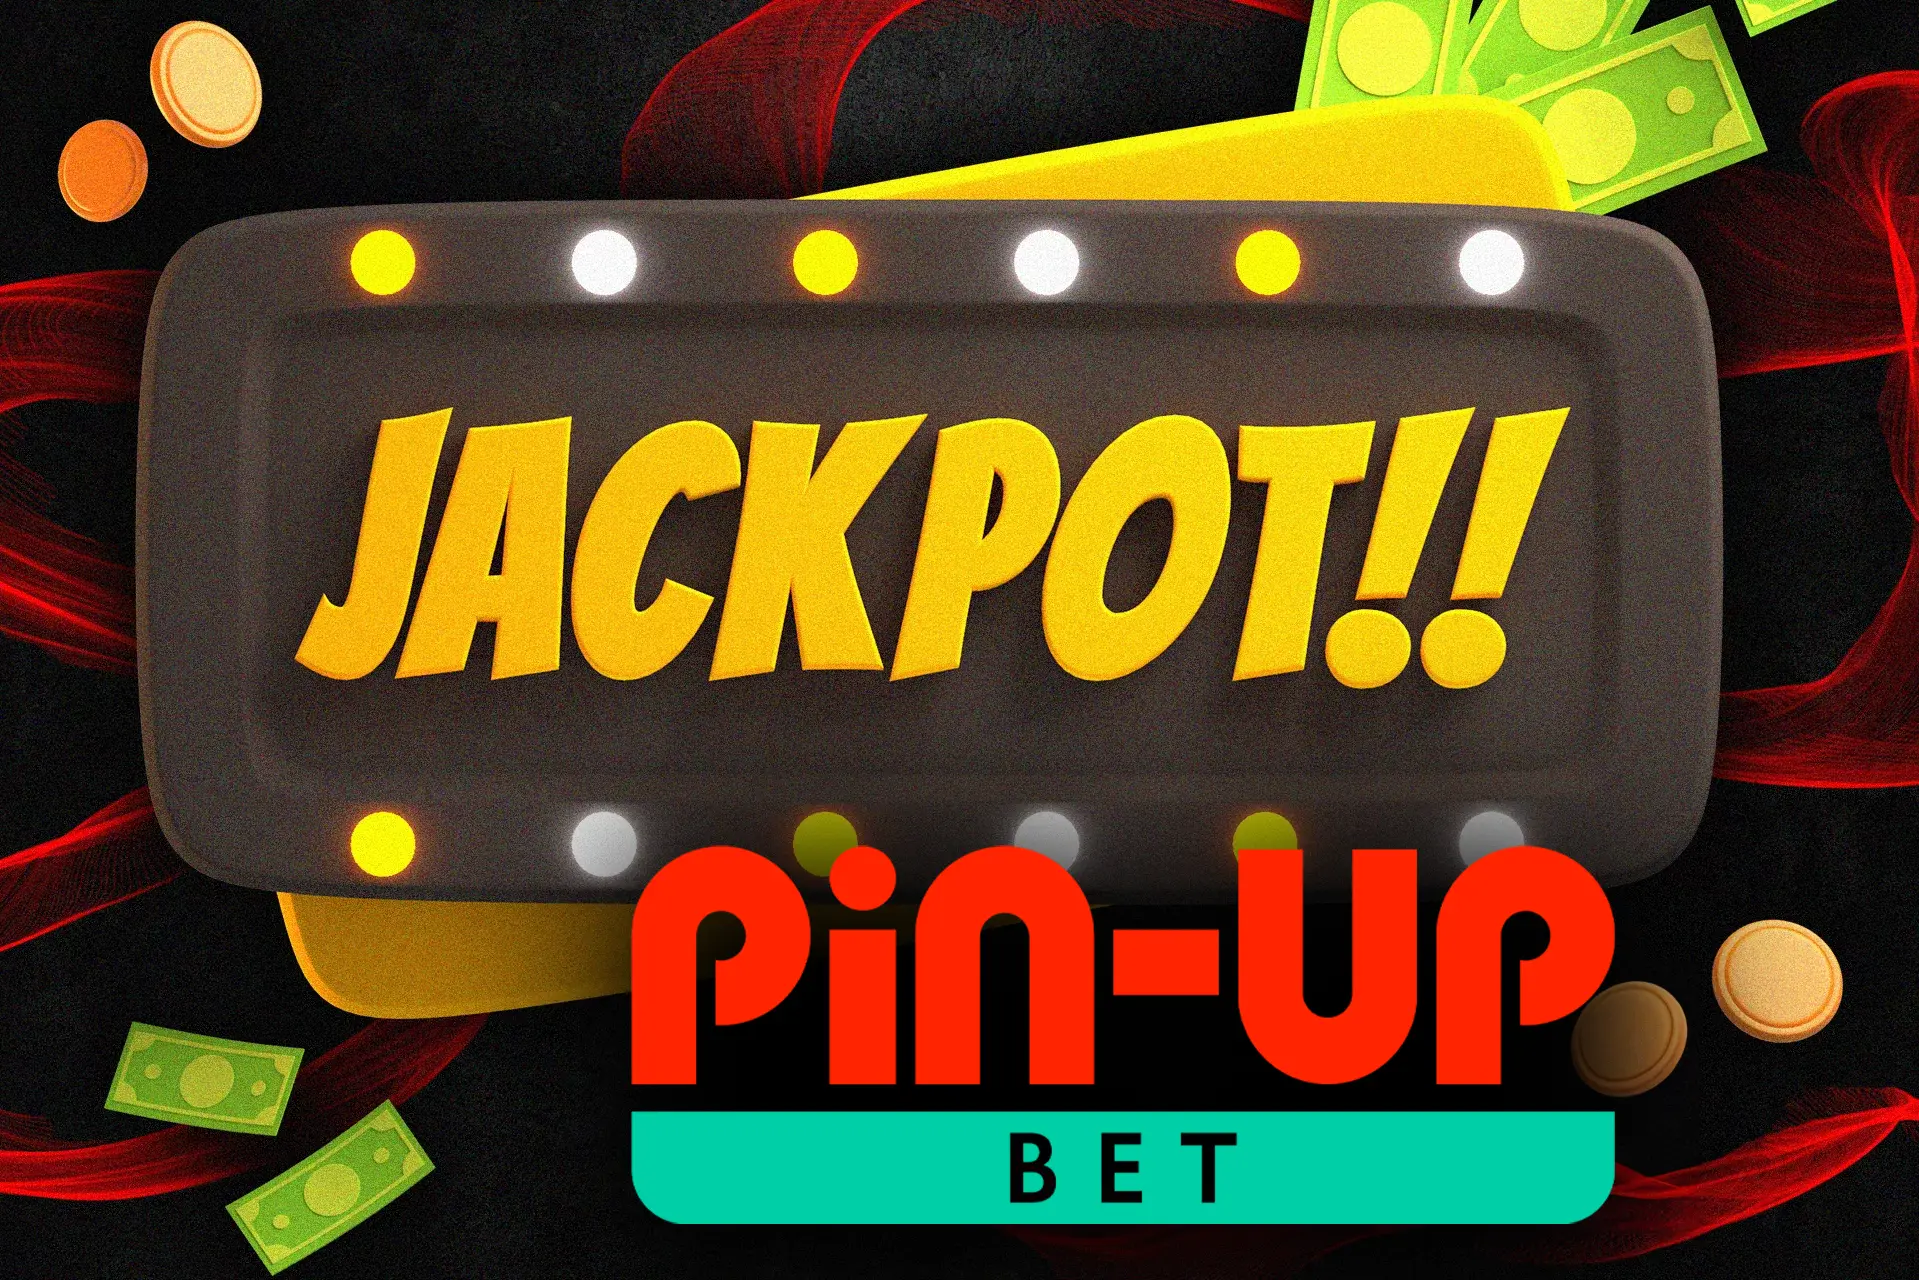 Try to win a jackpot in the Pin Up casino.